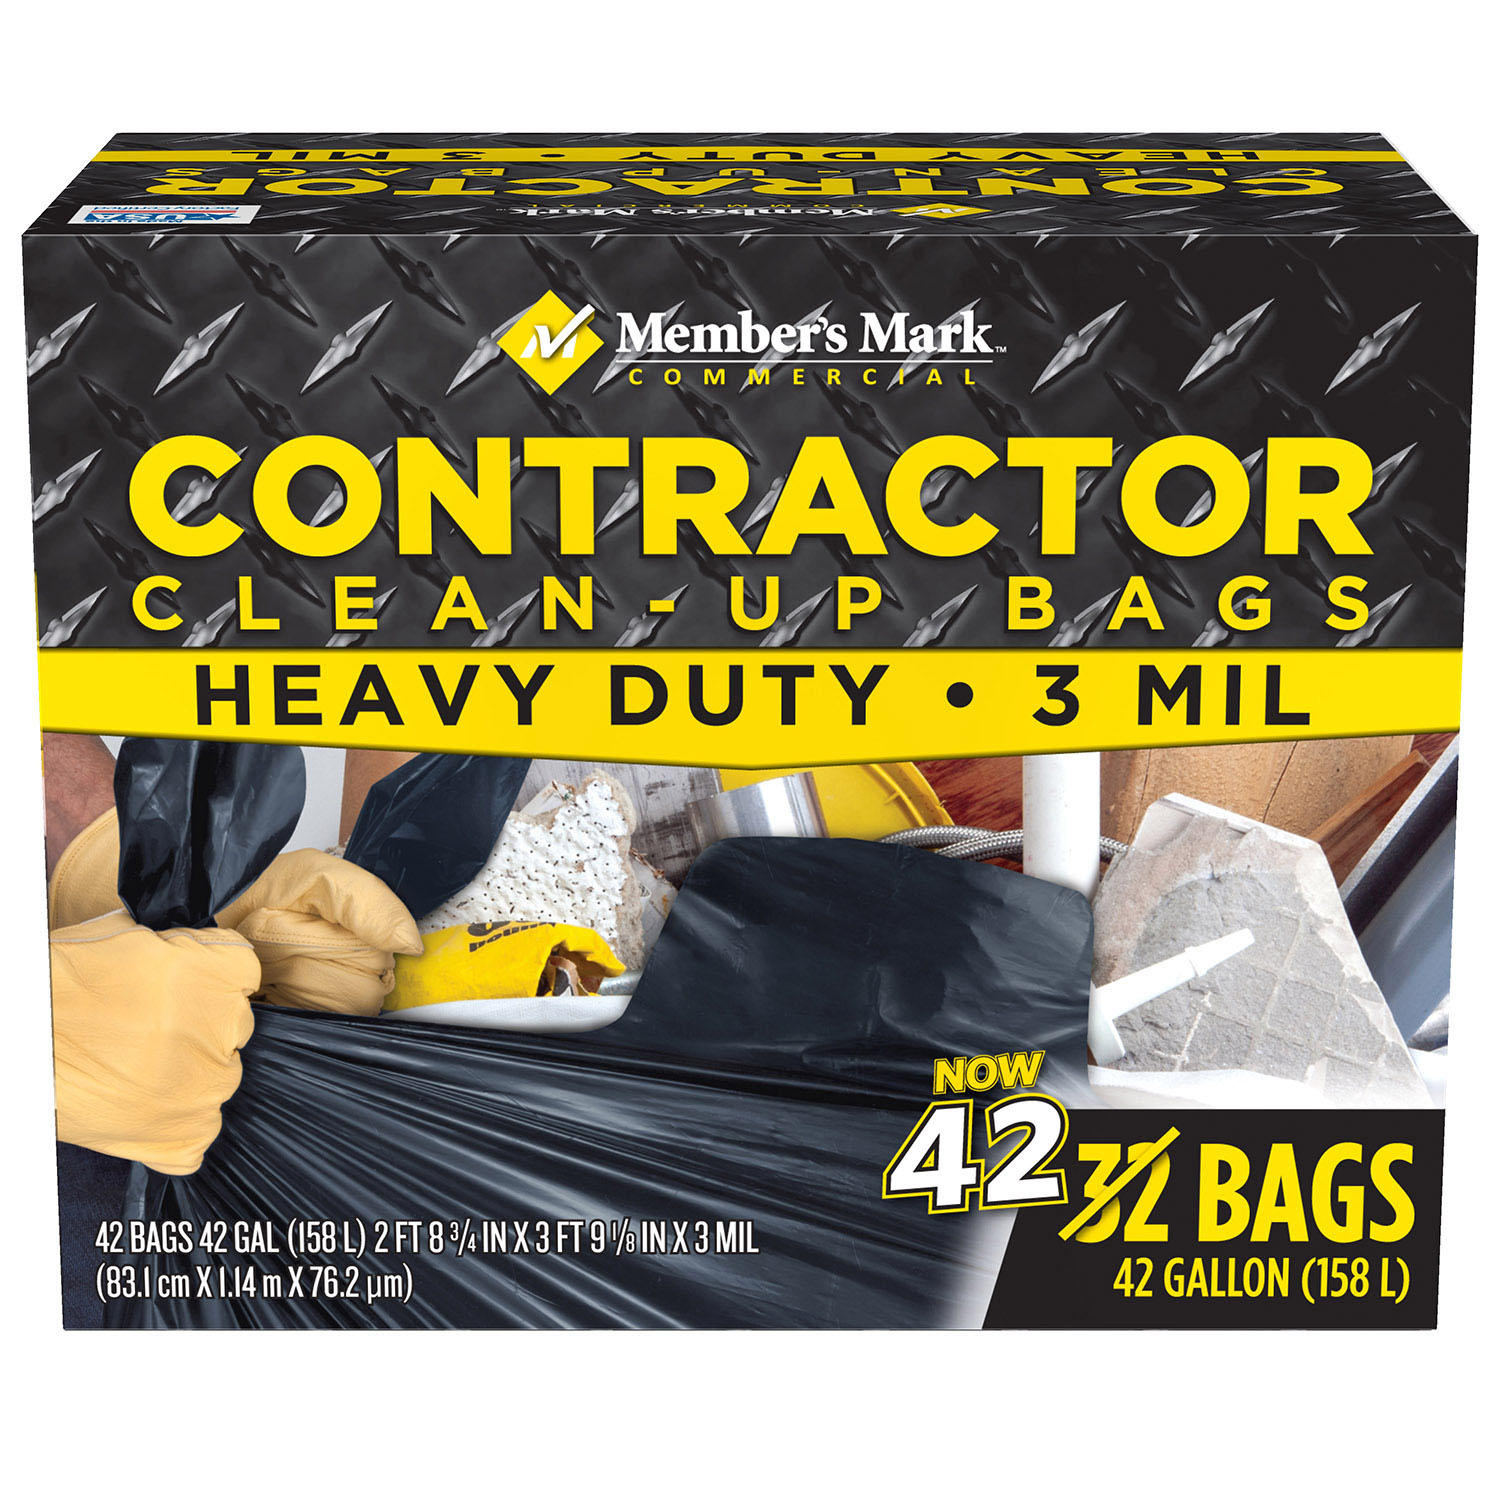 https://bigbigmart.com/wp-content/uploads/2022/07/Members-Mark-Commercial-Contractor-Clean-Up-Trash-Bags-42-gal.-42-ct.3.jpg